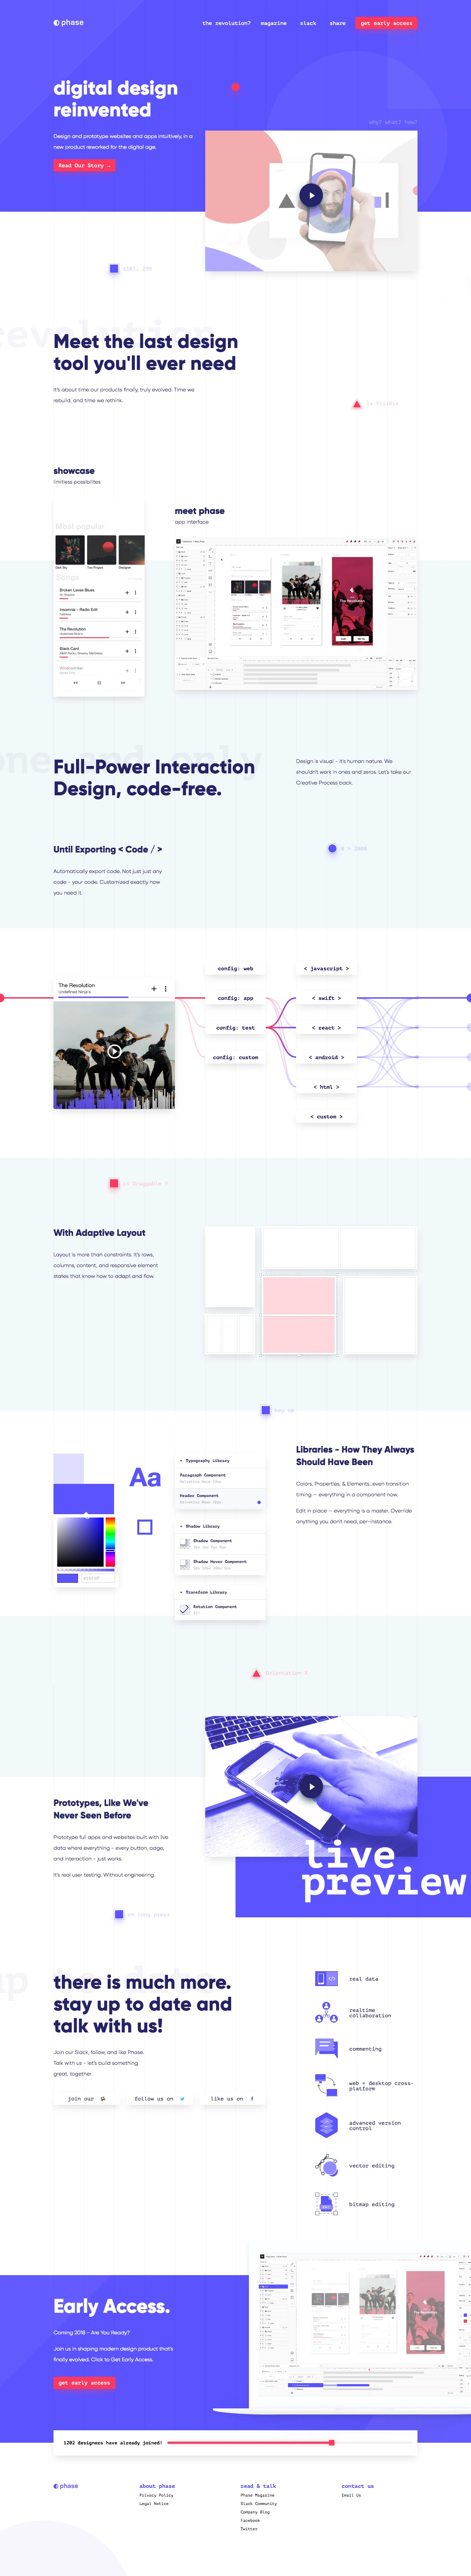 Phase Landing Page Example: Design and prototype websites and apps visually and intuitively, in a new powerful product reworked for the digital age.